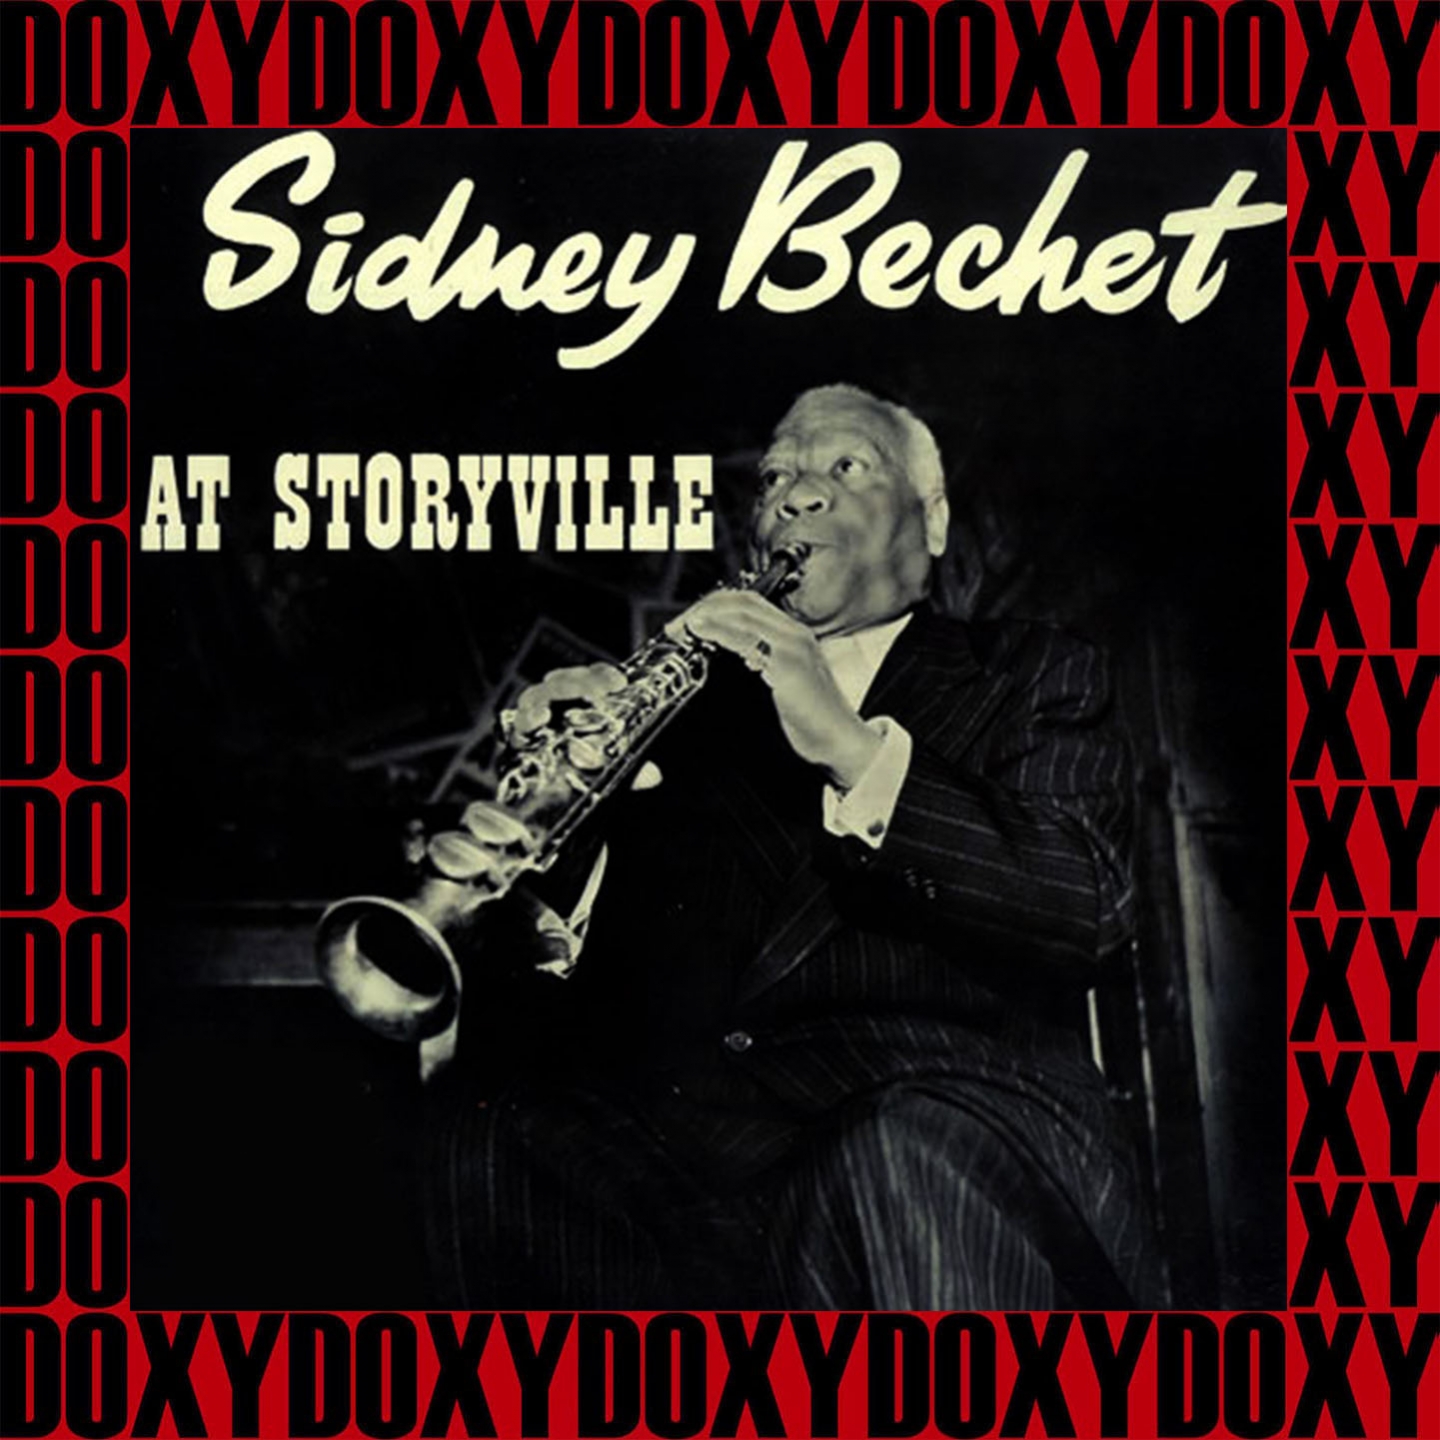 Jazz At Storyville, The Complete Recordings (Remastered Version) (Doxy Collection)